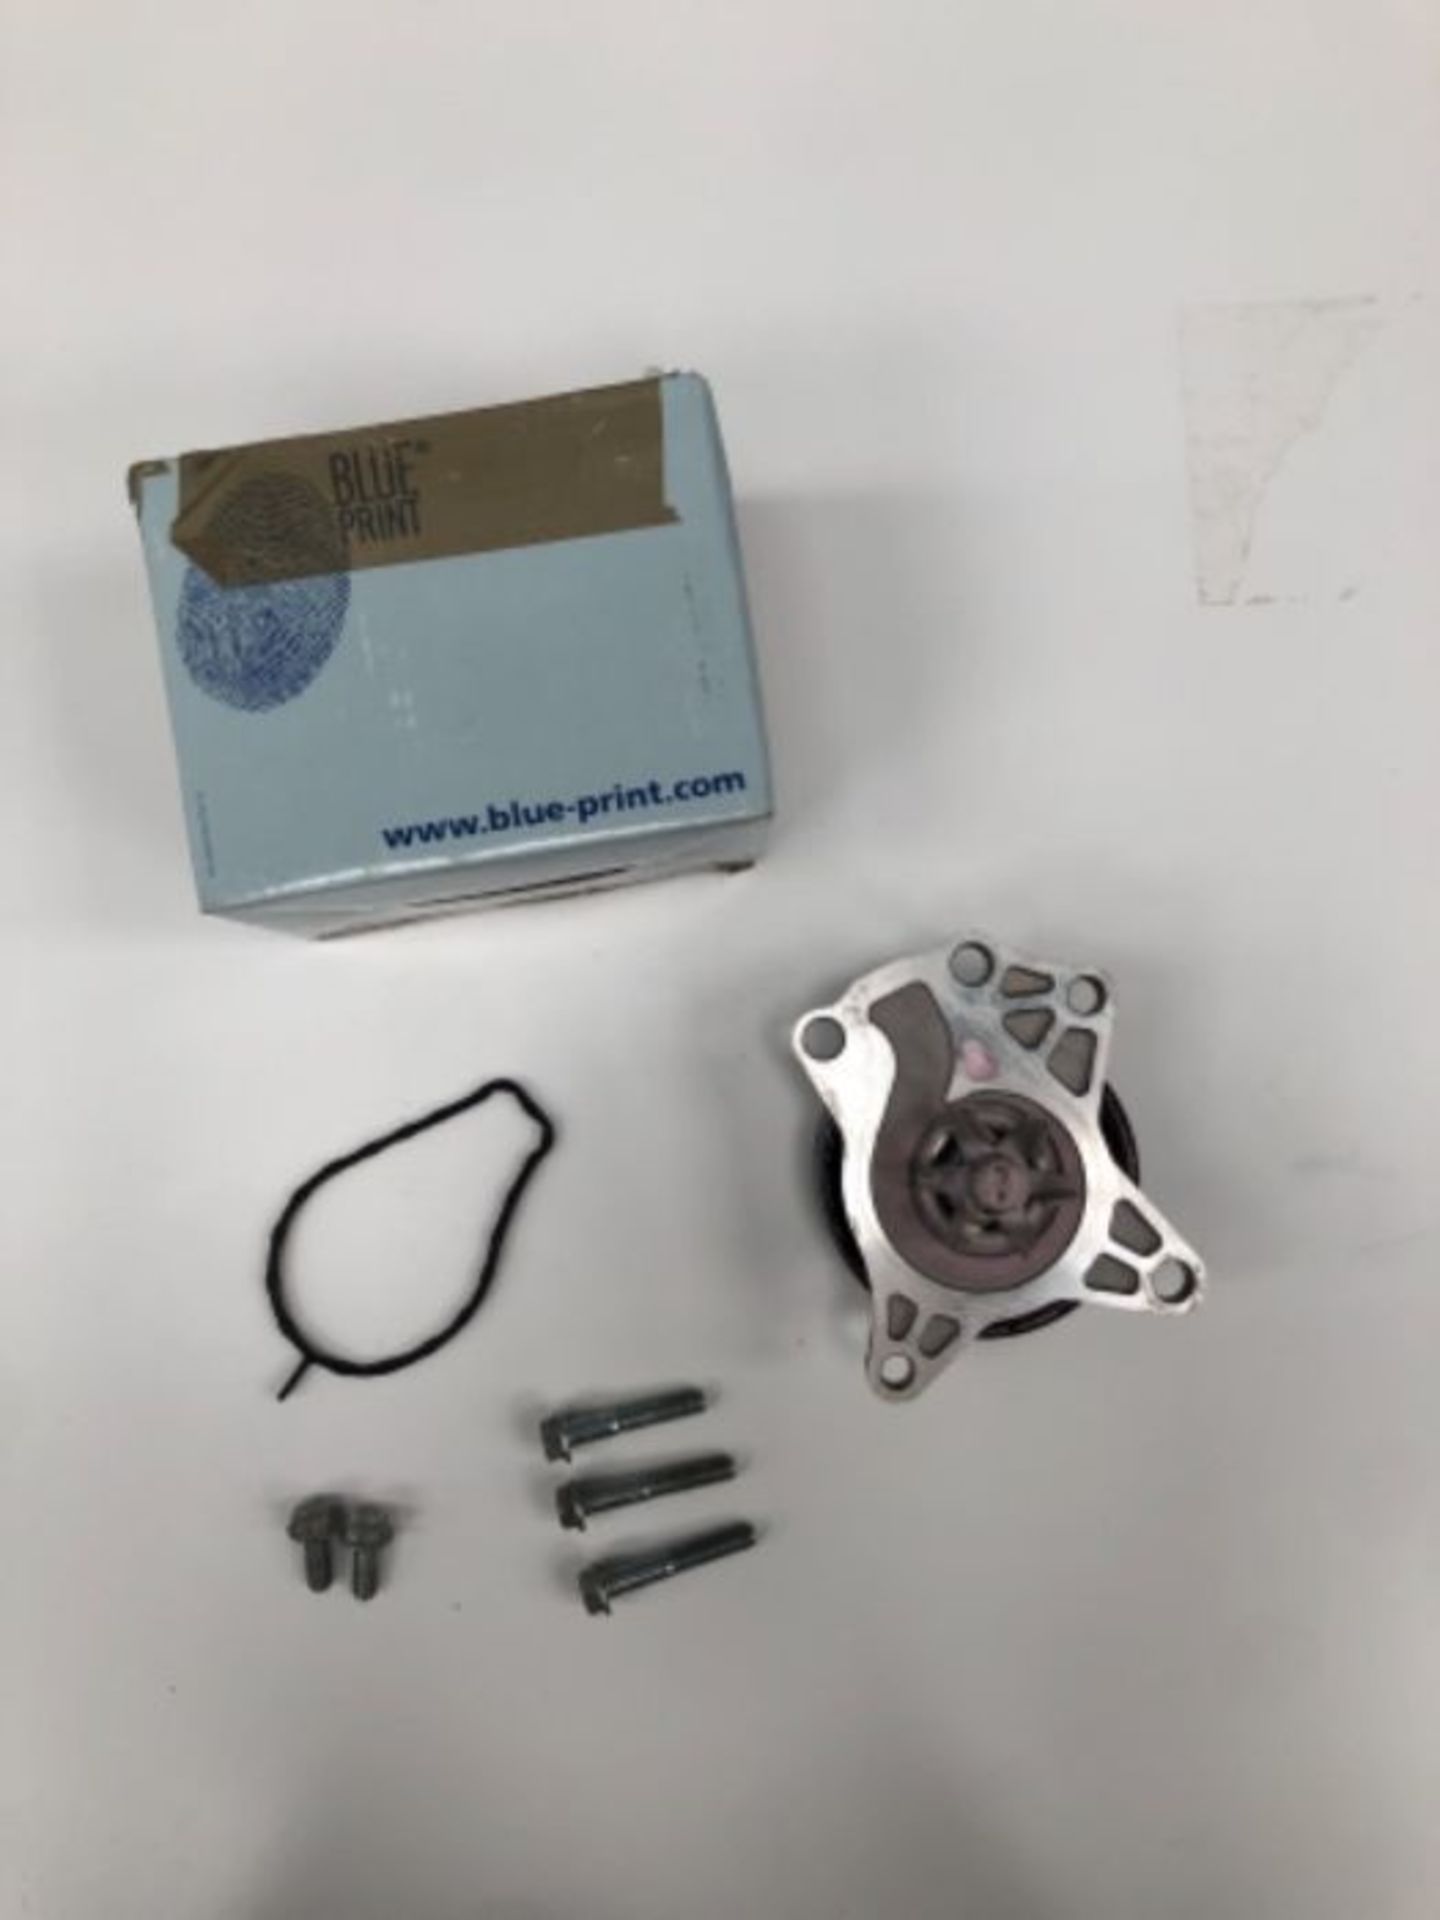 Blue Print ADT391100 Water Pump with seal and screws, pack of one - Image 2 of 3